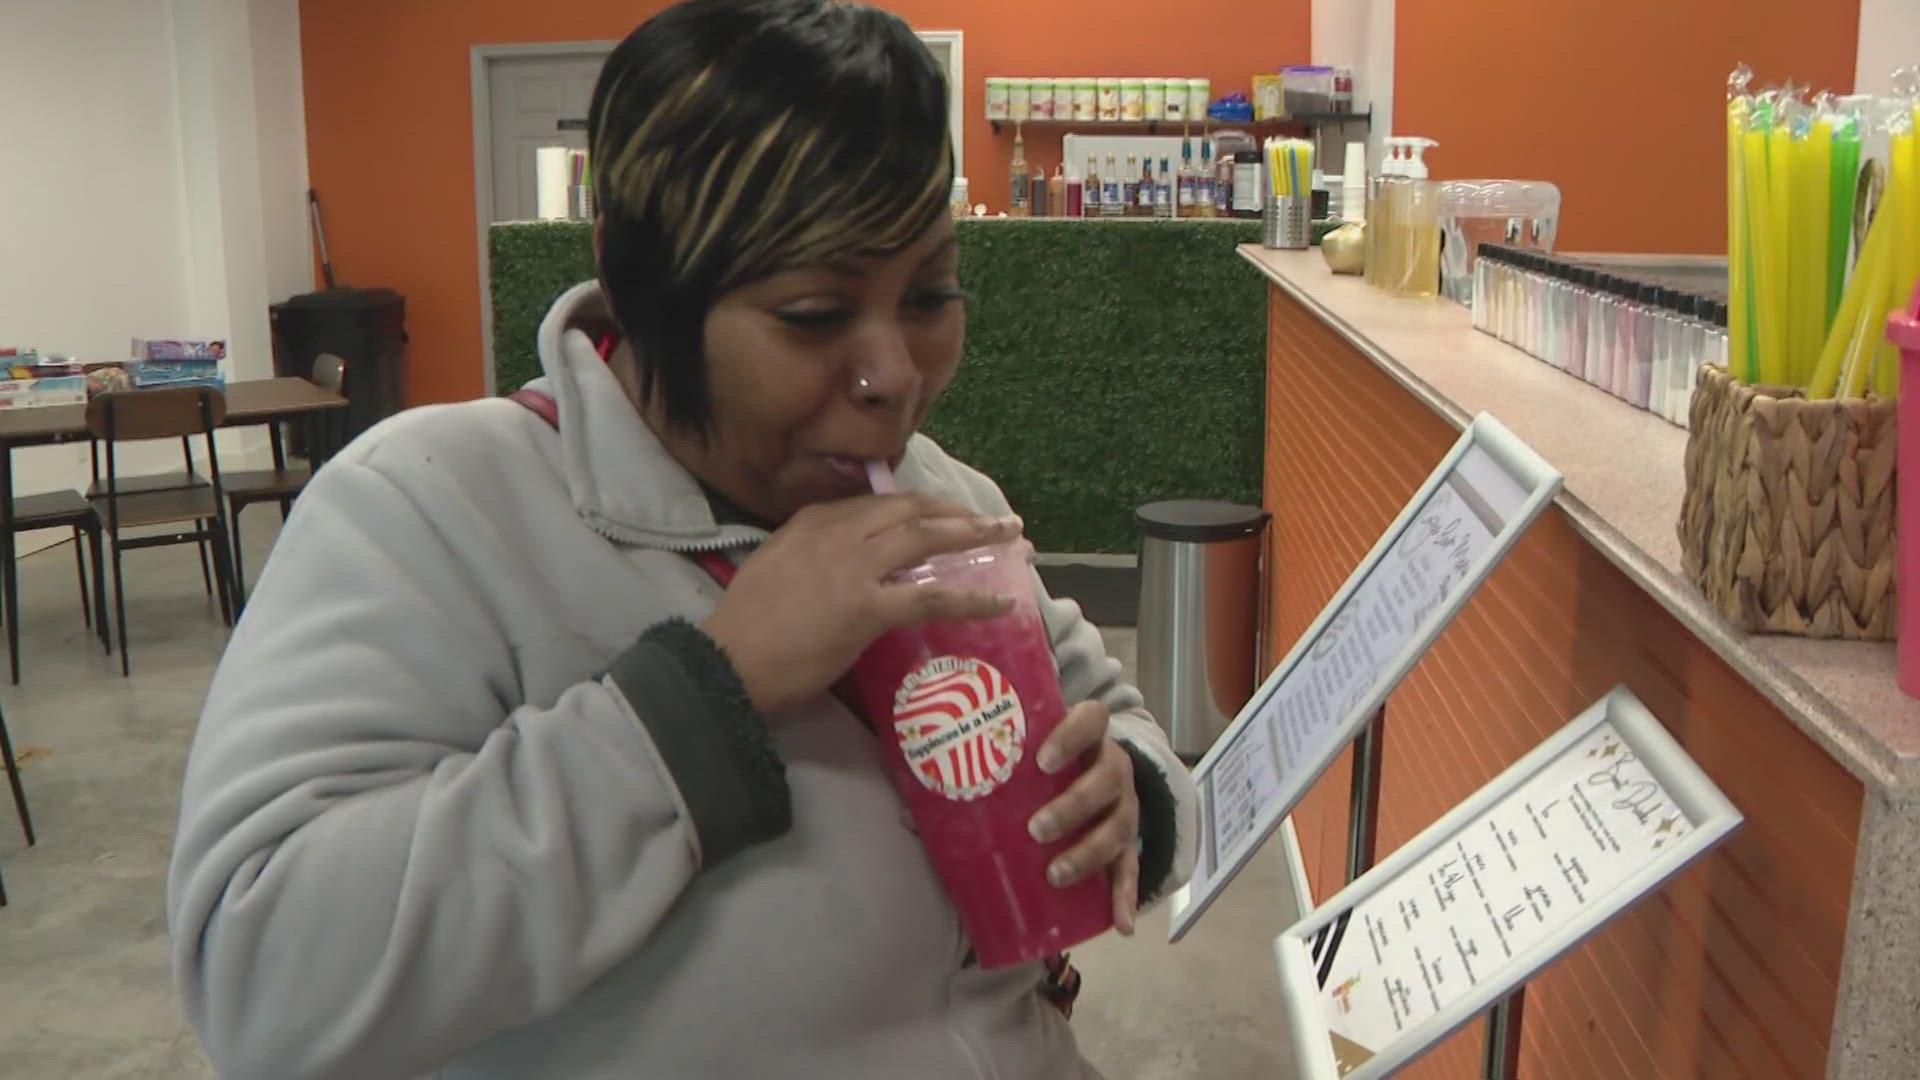 Ferguson's economy is booming thanks to small businesses. Juanita Thompson opened Yummie Nutrition in January.